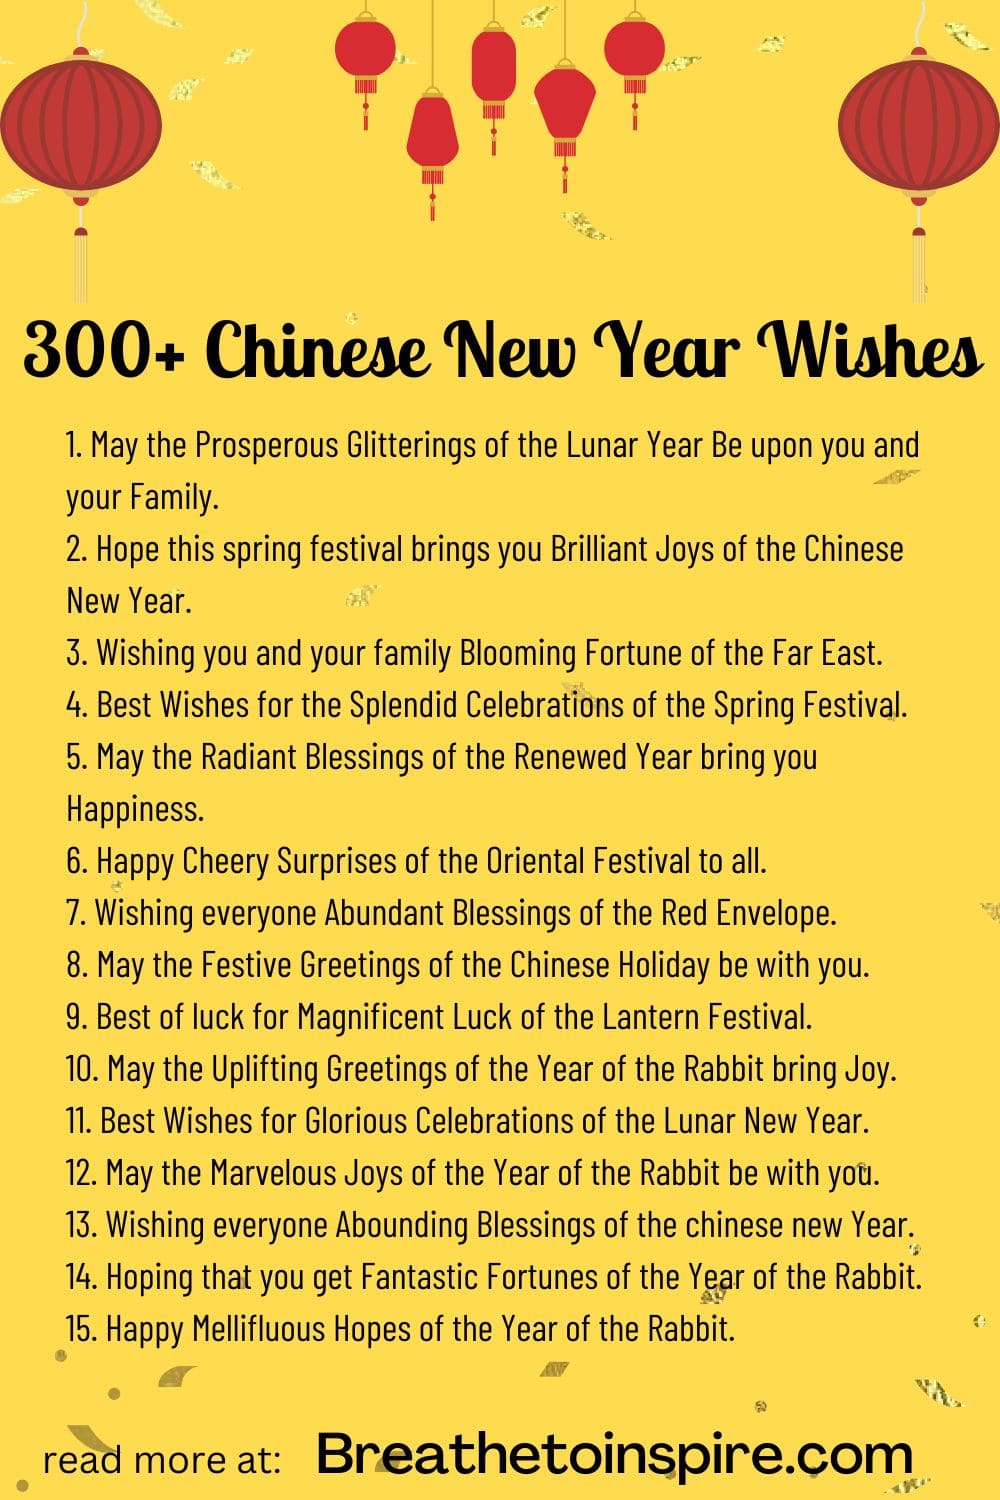 300 Chinese New Year Wishes, Greetings For This Lunar And Spring